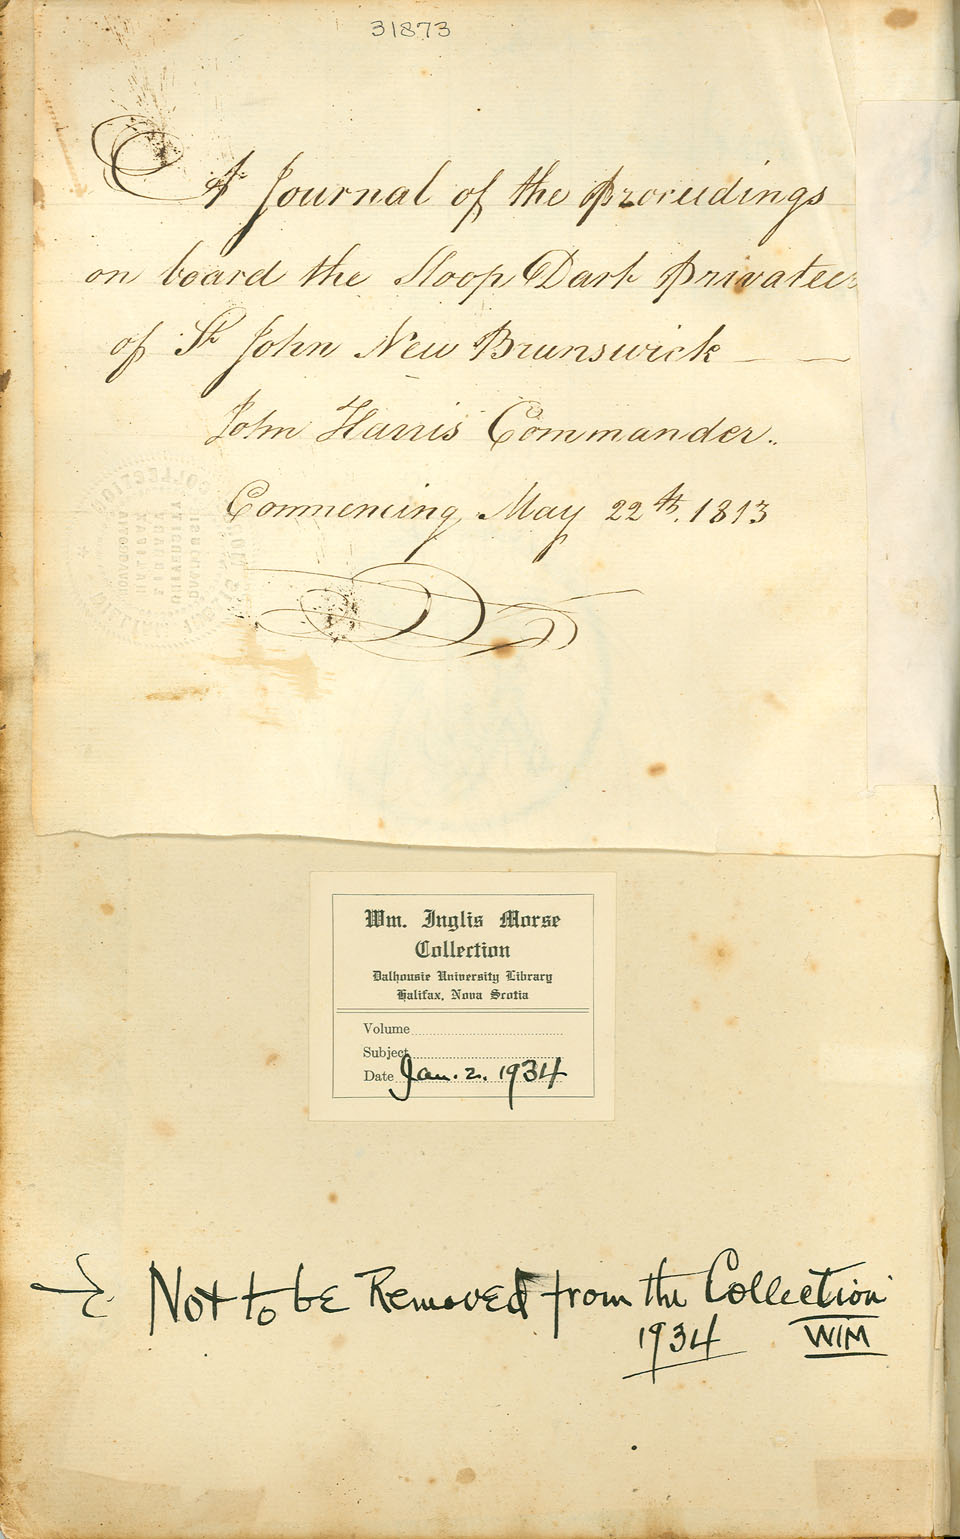 privateers : A Journal of the Proceedings on board the Sloop Dart</i> Privateer of St. John New Brunswick, John Harris Commander, commencing May 22th, 18